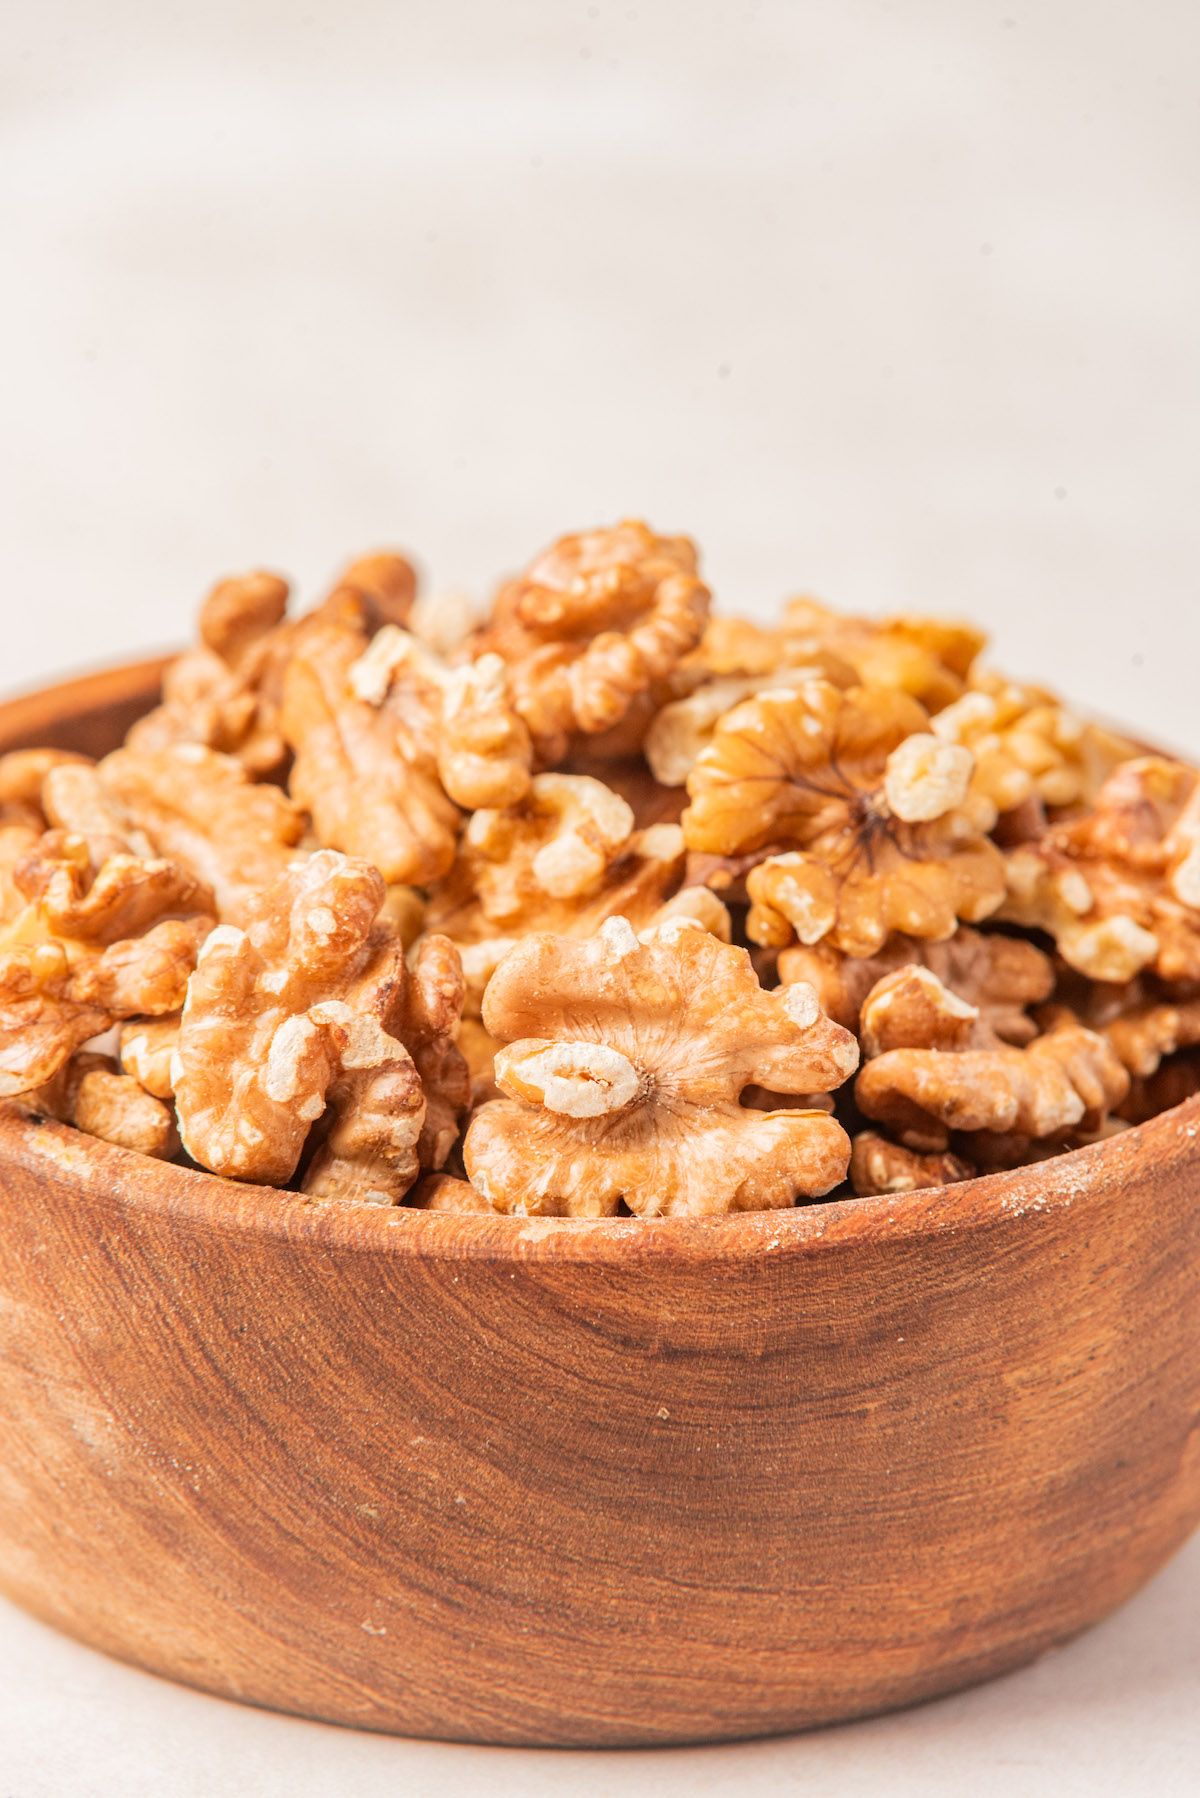 a wooden bowl filled with toasted walnuts